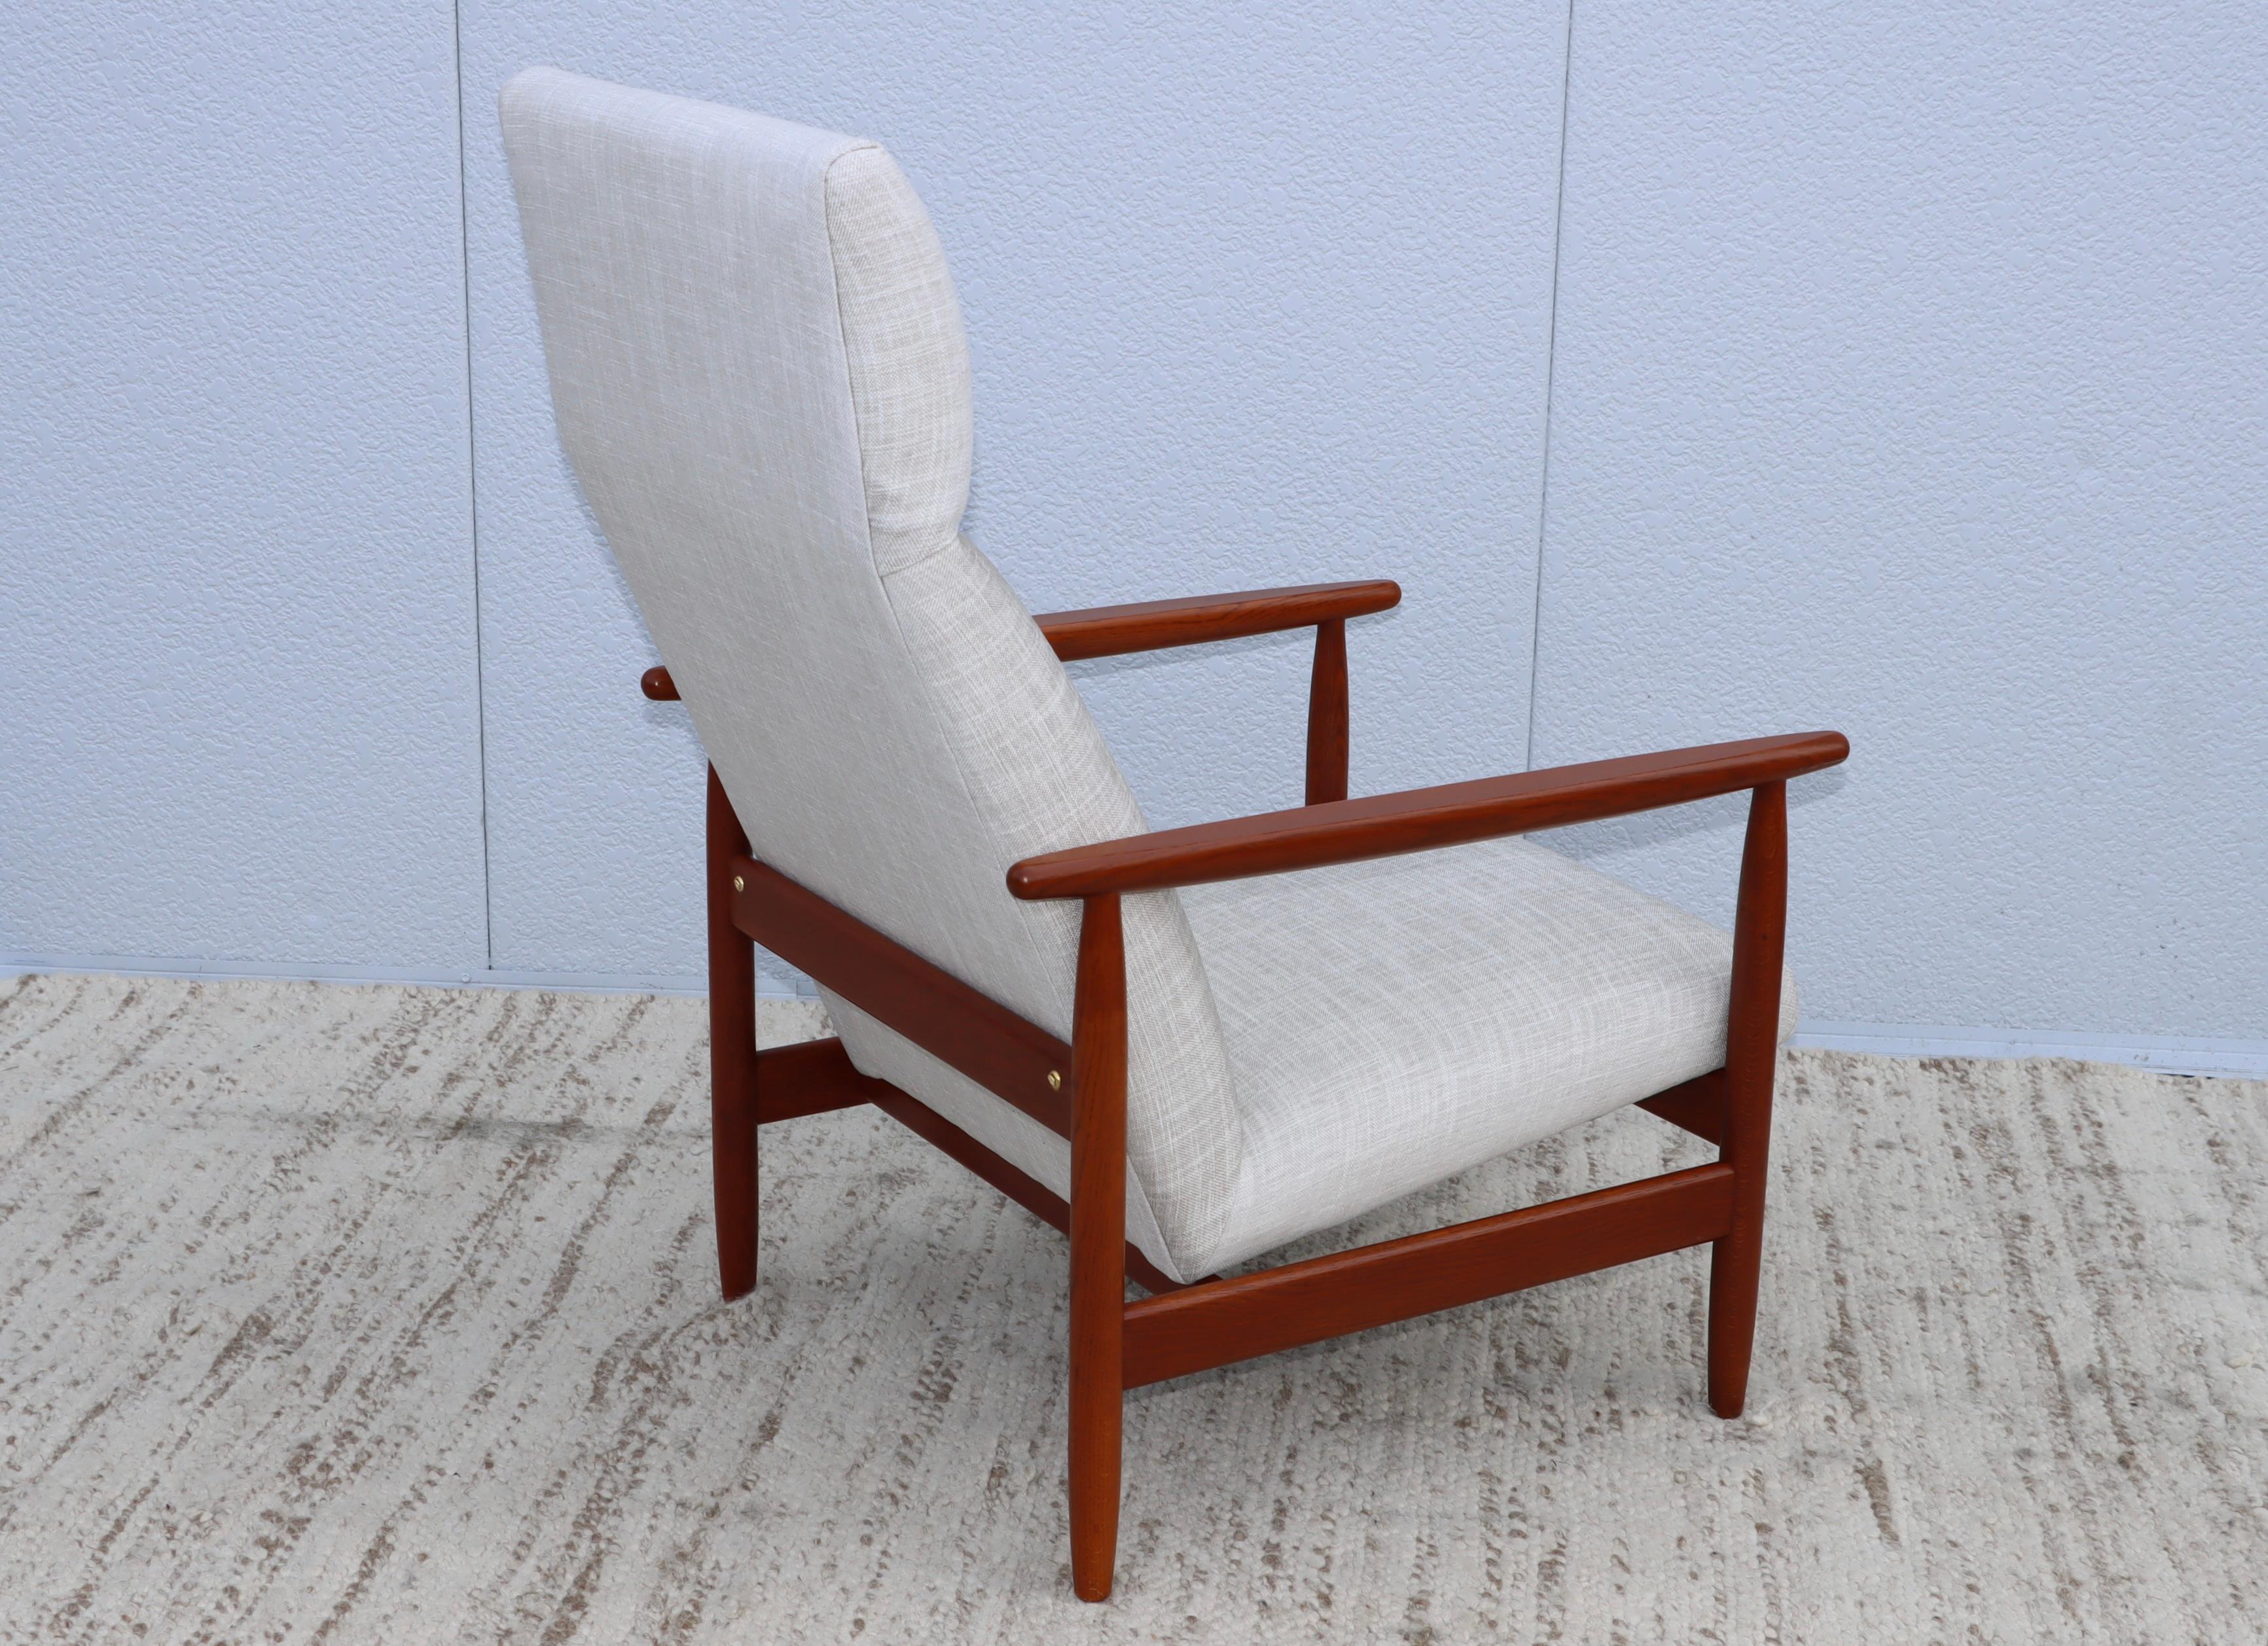 Stunning 1960's Mid-Century Modern Danish teak high back armchair designed by Ejvind A. Johanssen, in vintage condition with minor wear to the teak, newly re-upholstered in Donghia fabric.